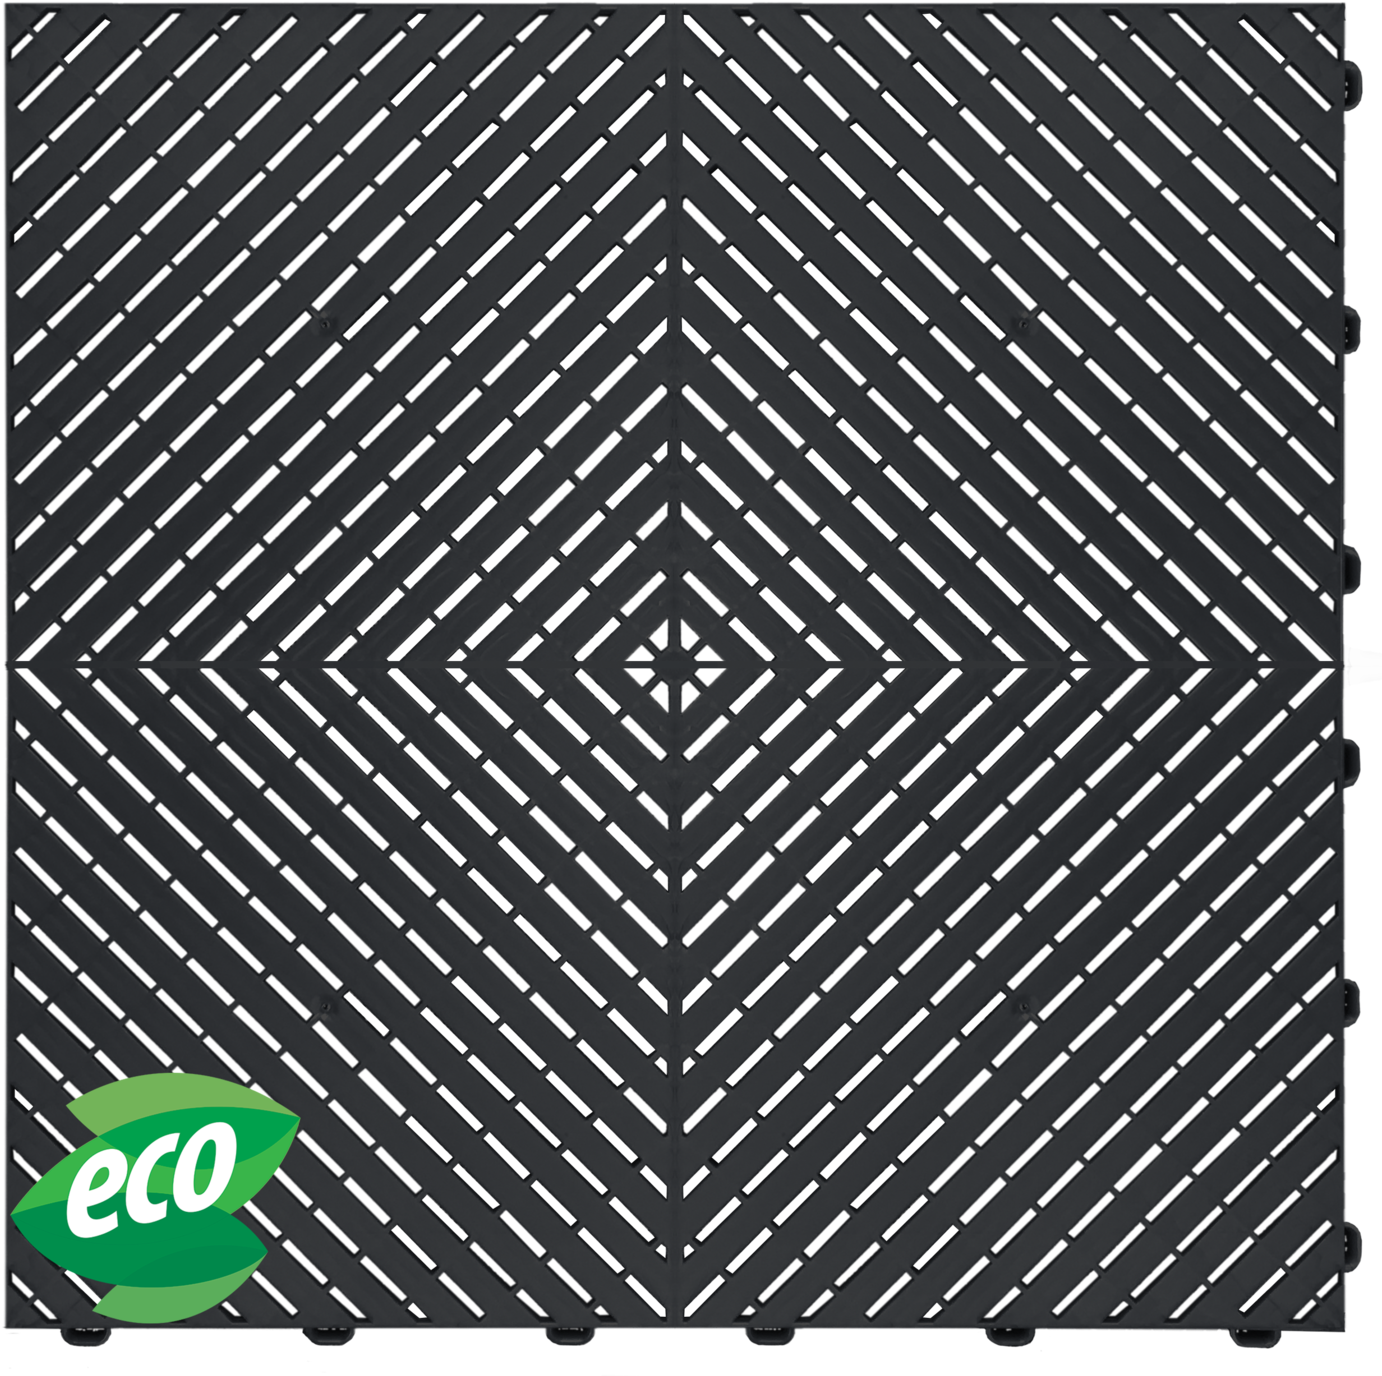 A Black Square With Lines And A Green Logo